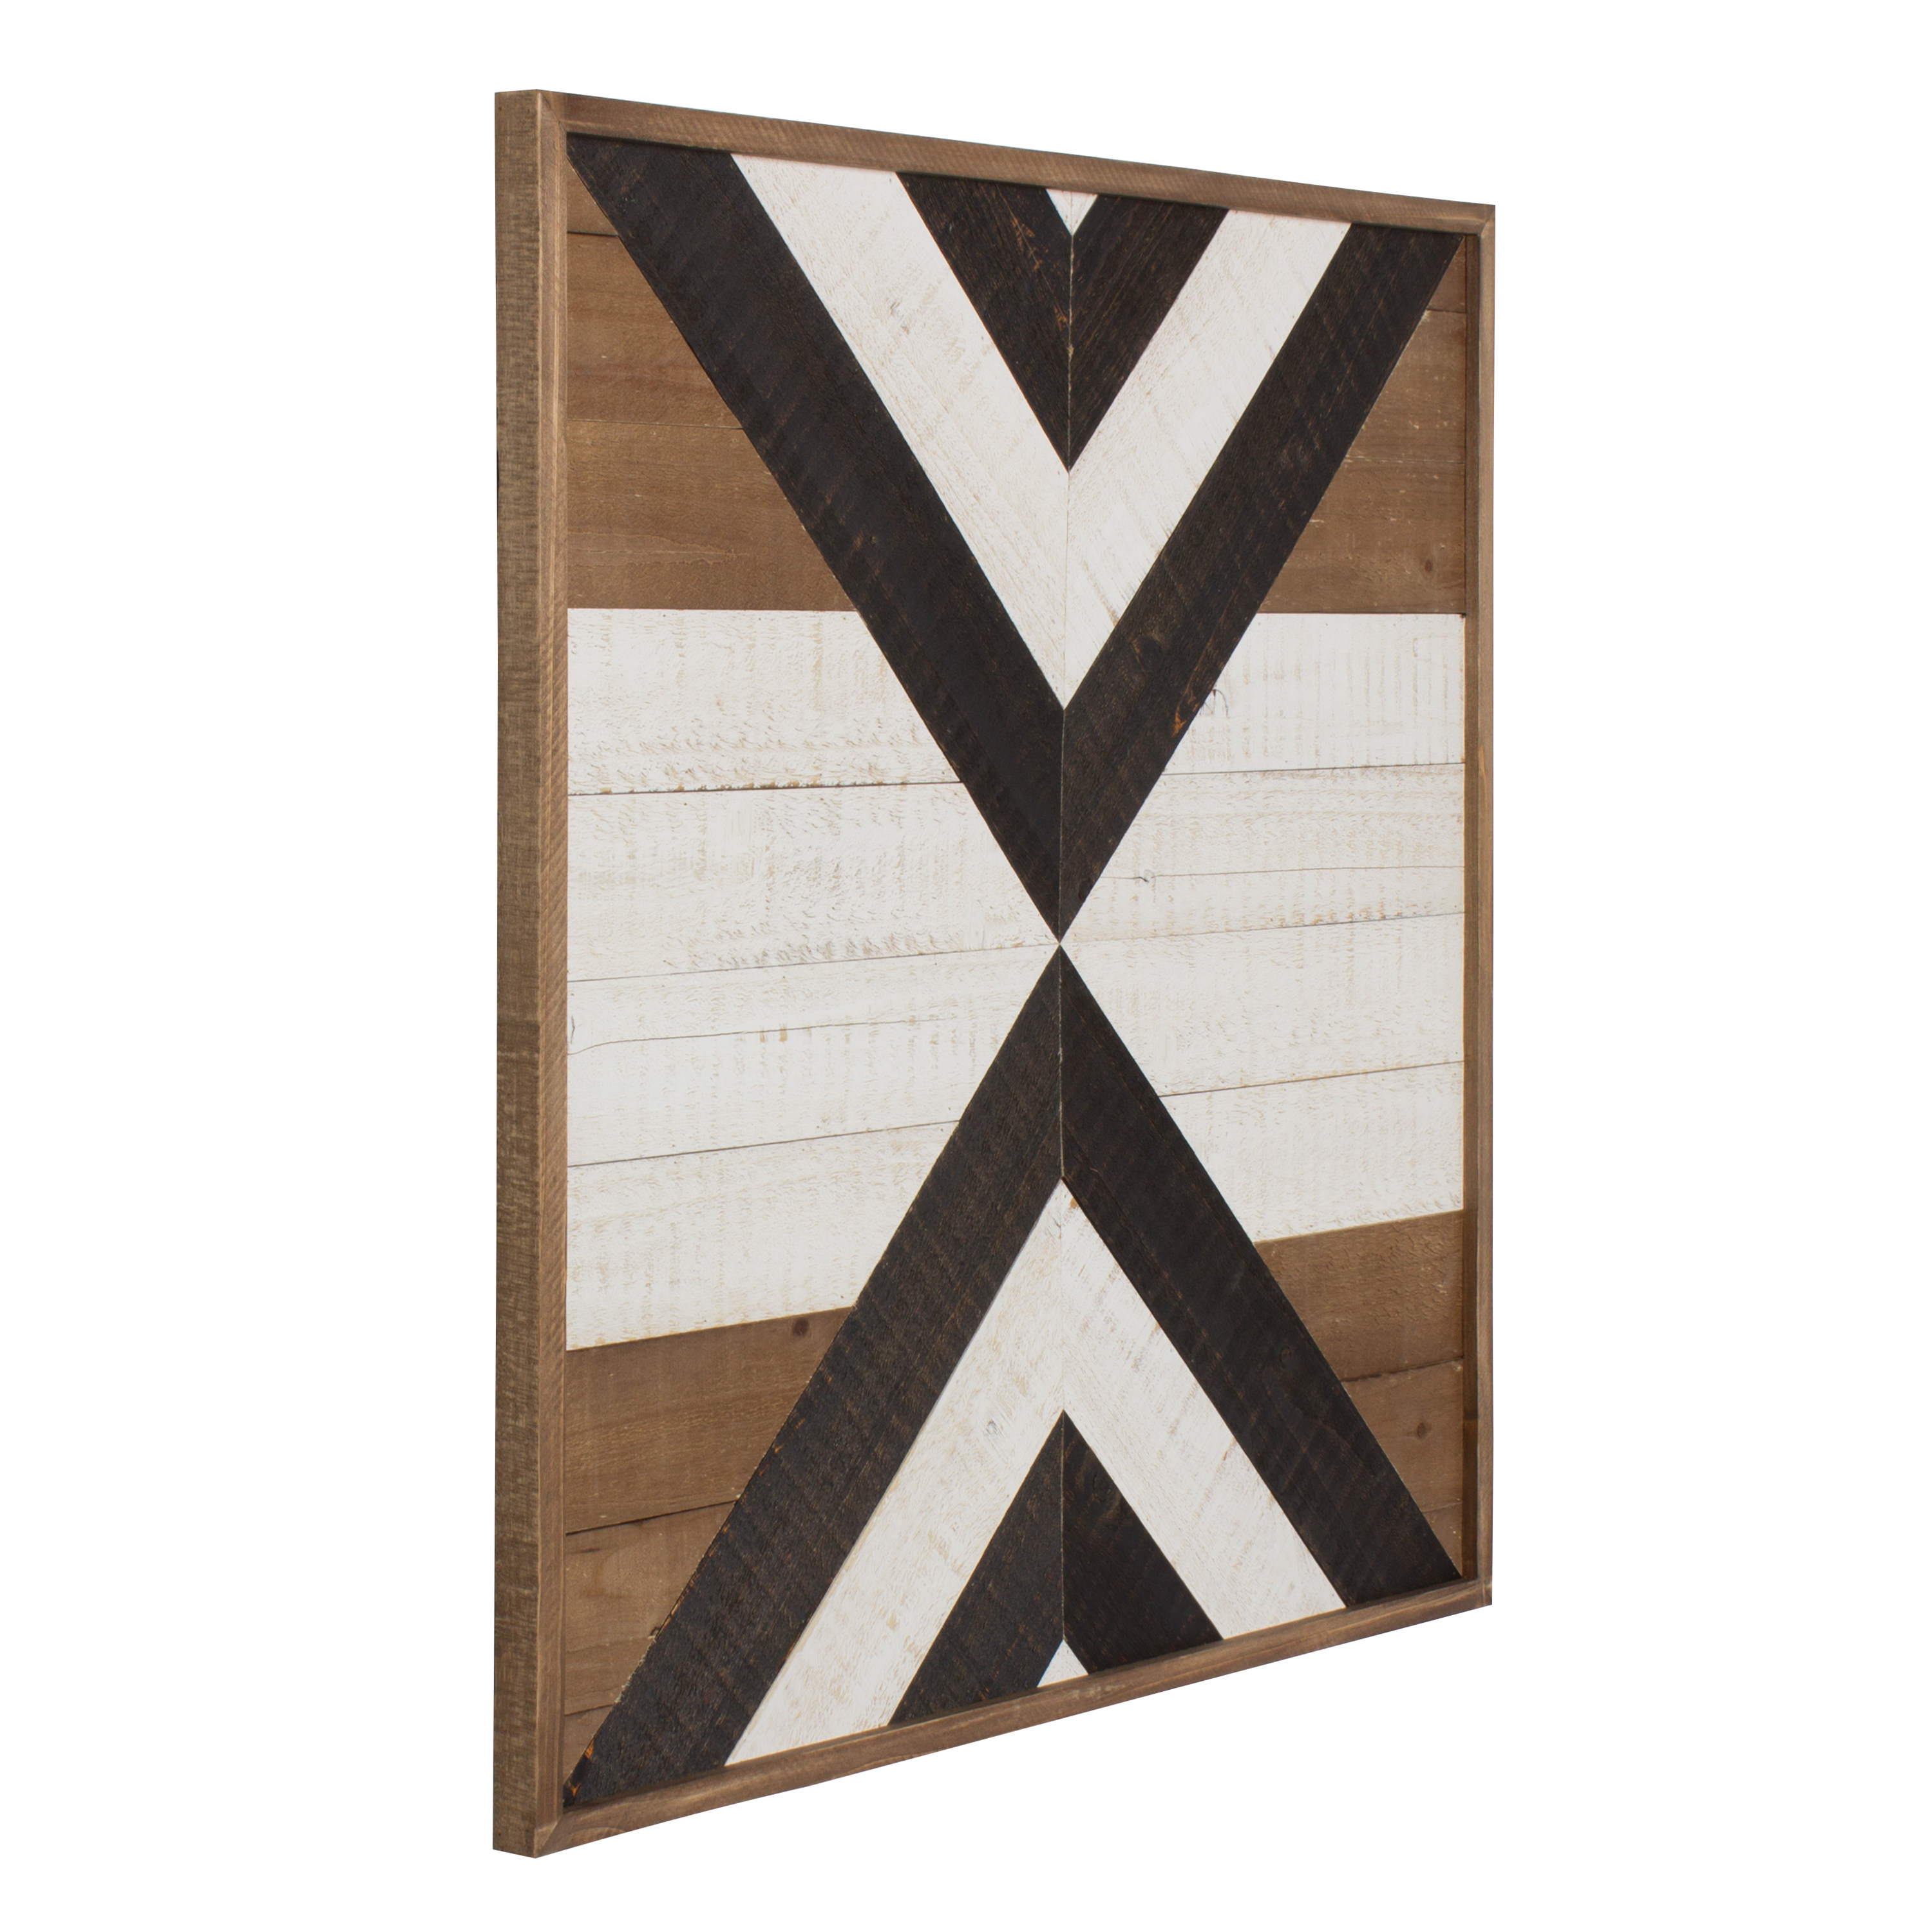 Kate and Laurel Baralt Shiplap Wood Plank Art, Black, White and Rustic Brown 